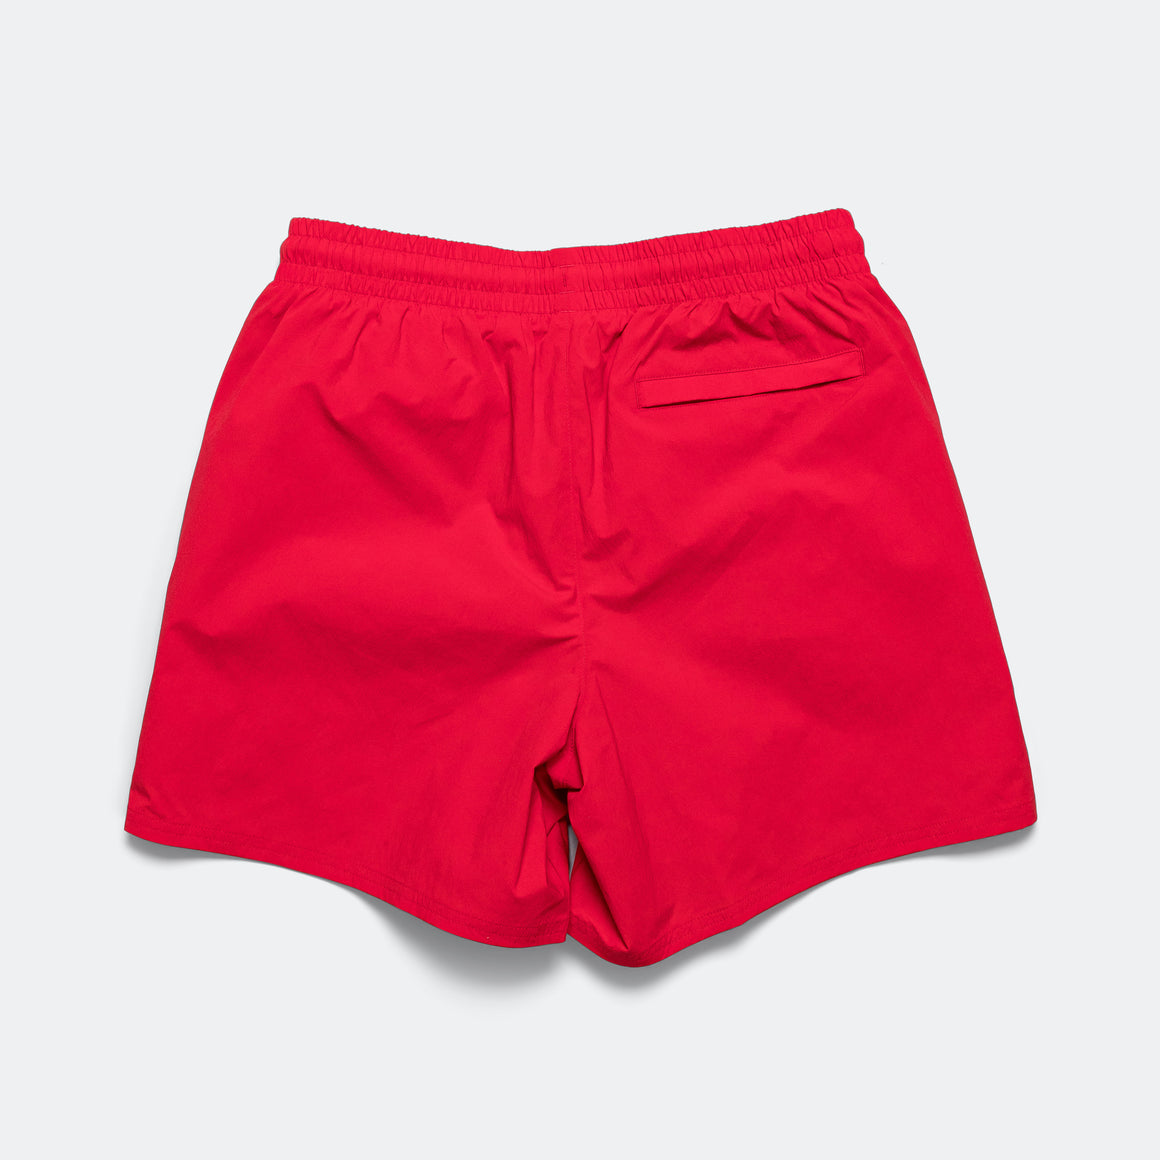 Archive Stretch Woven Short - Team Red